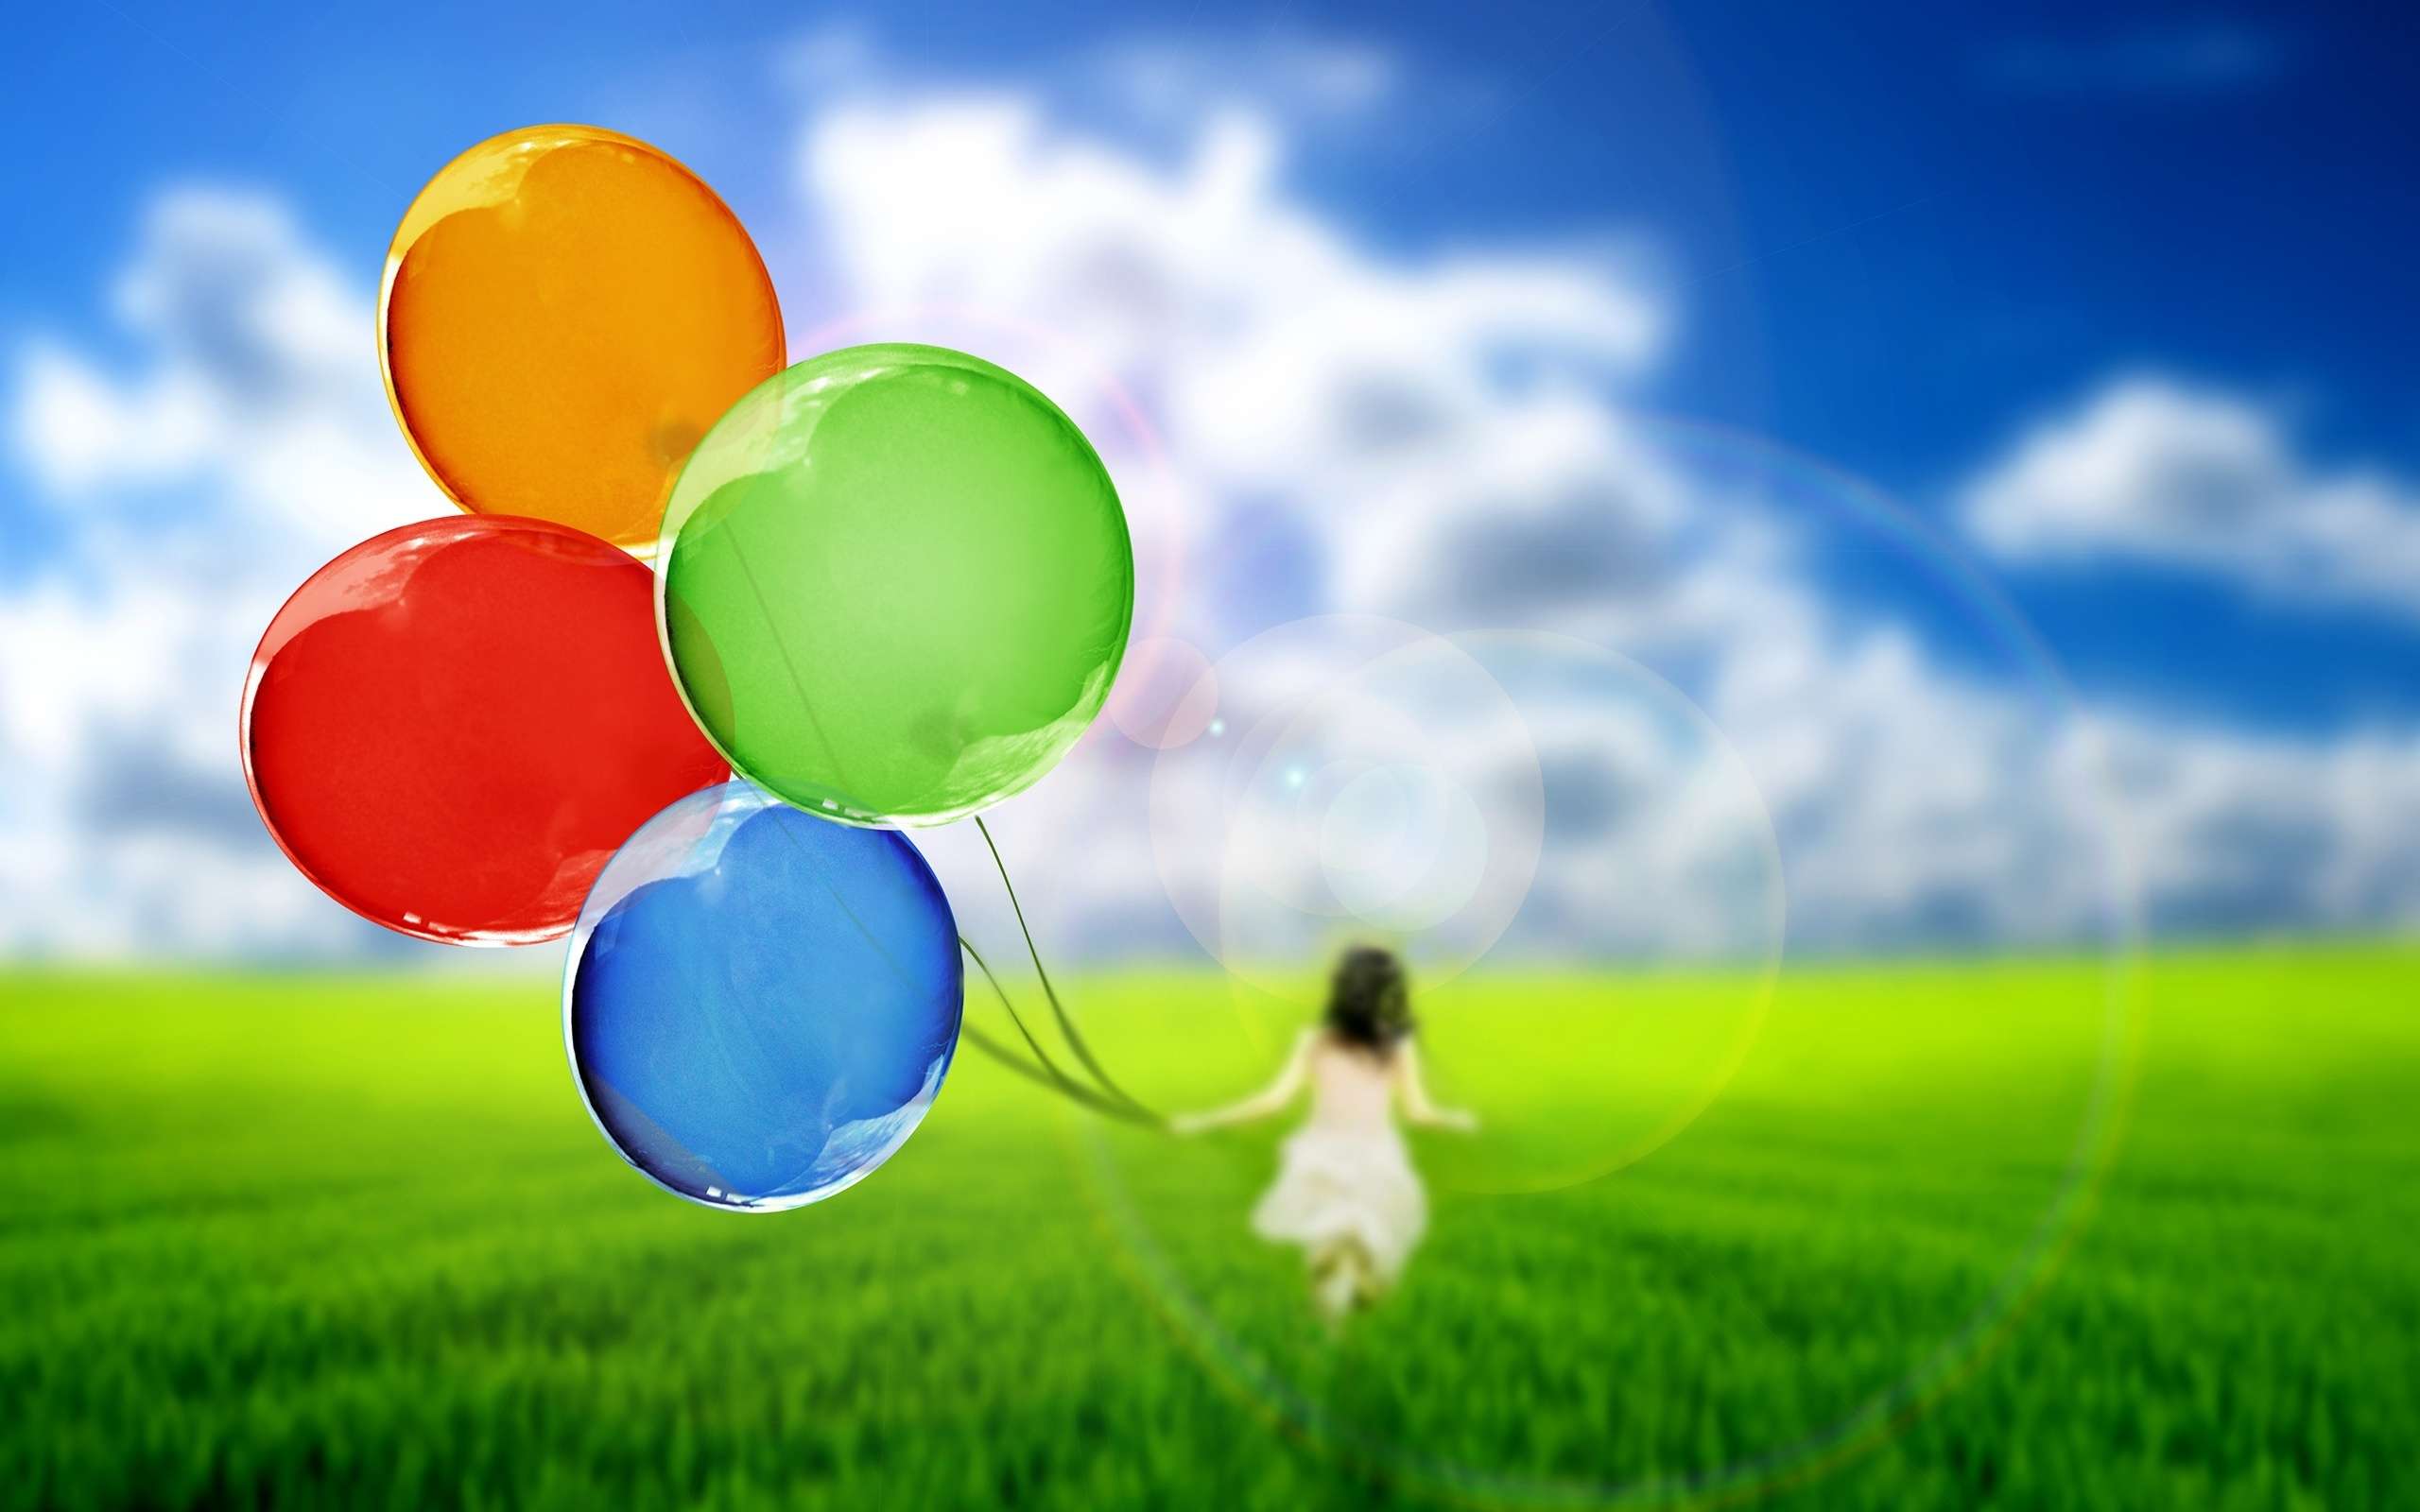 Balloon Wallpaper HD and Balloon Image Best Collection